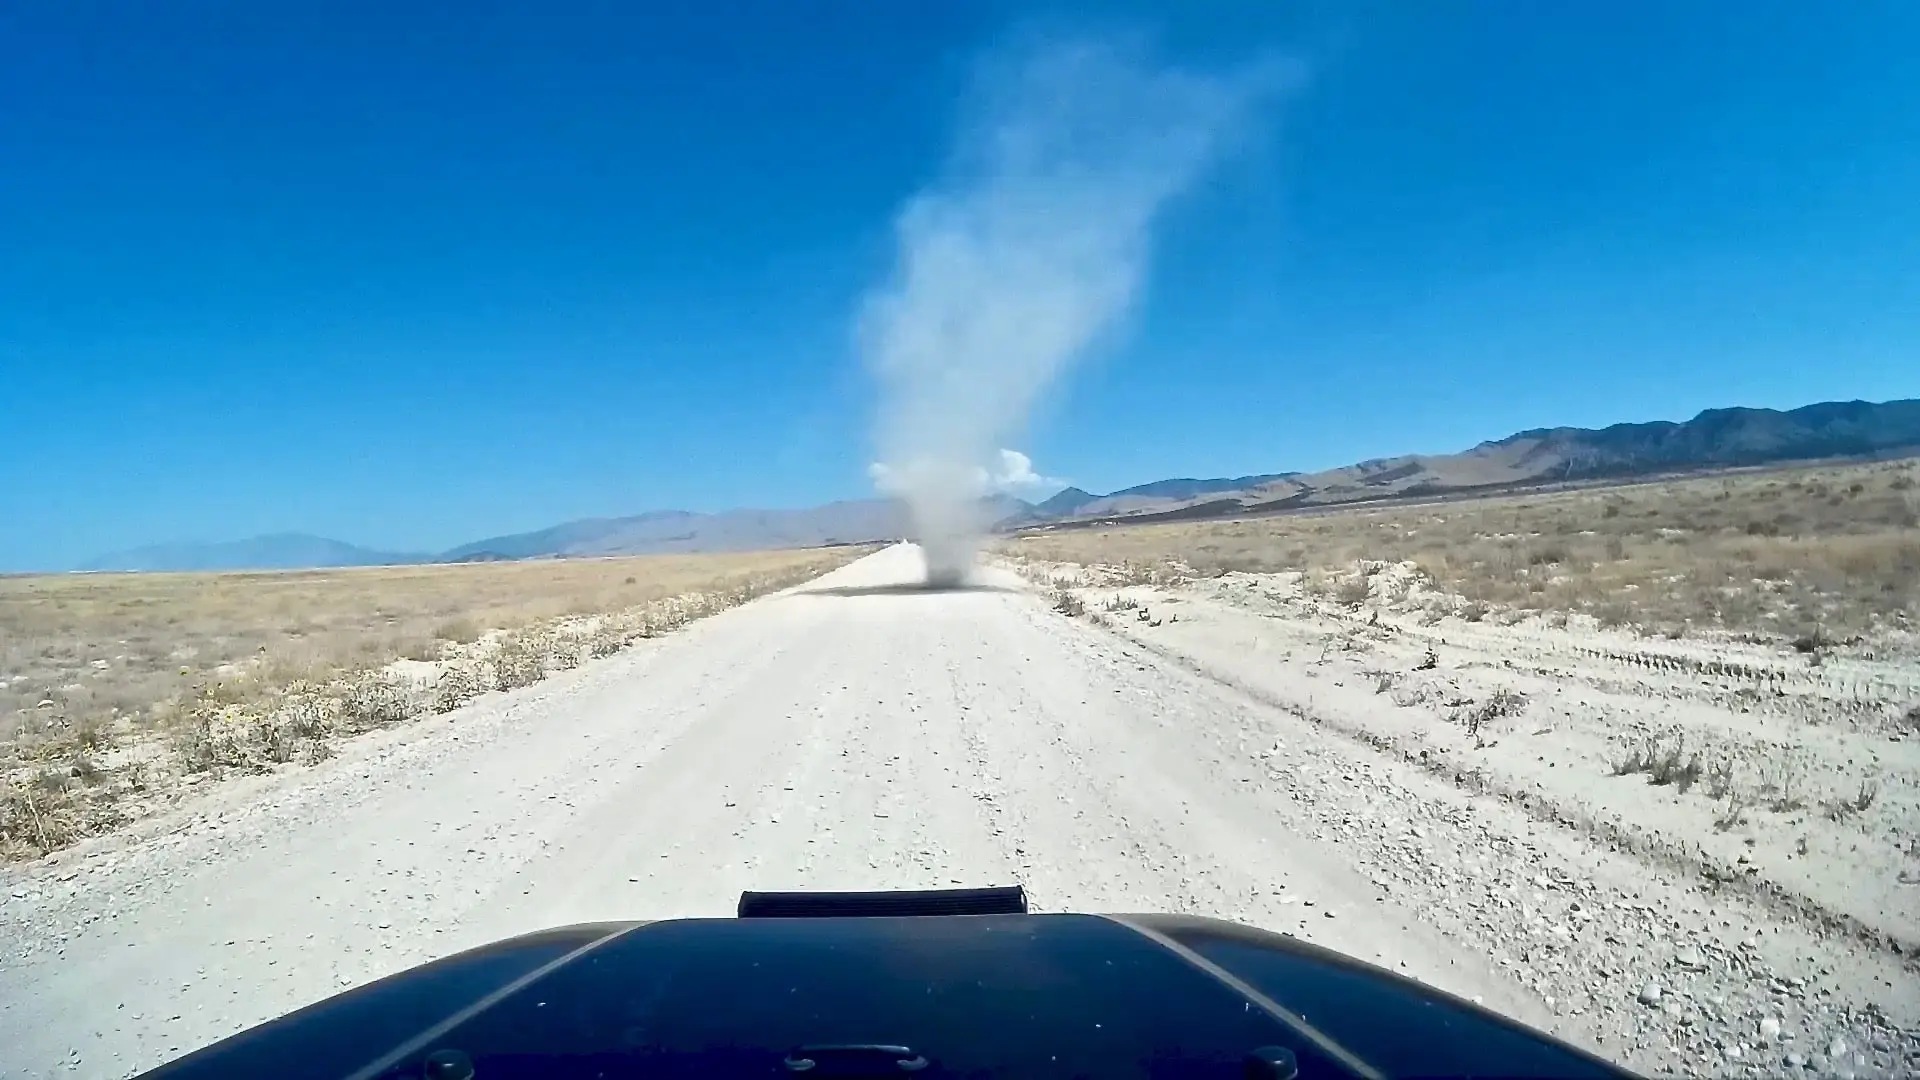 A large dust devil spins up on the road in front of our Jeep